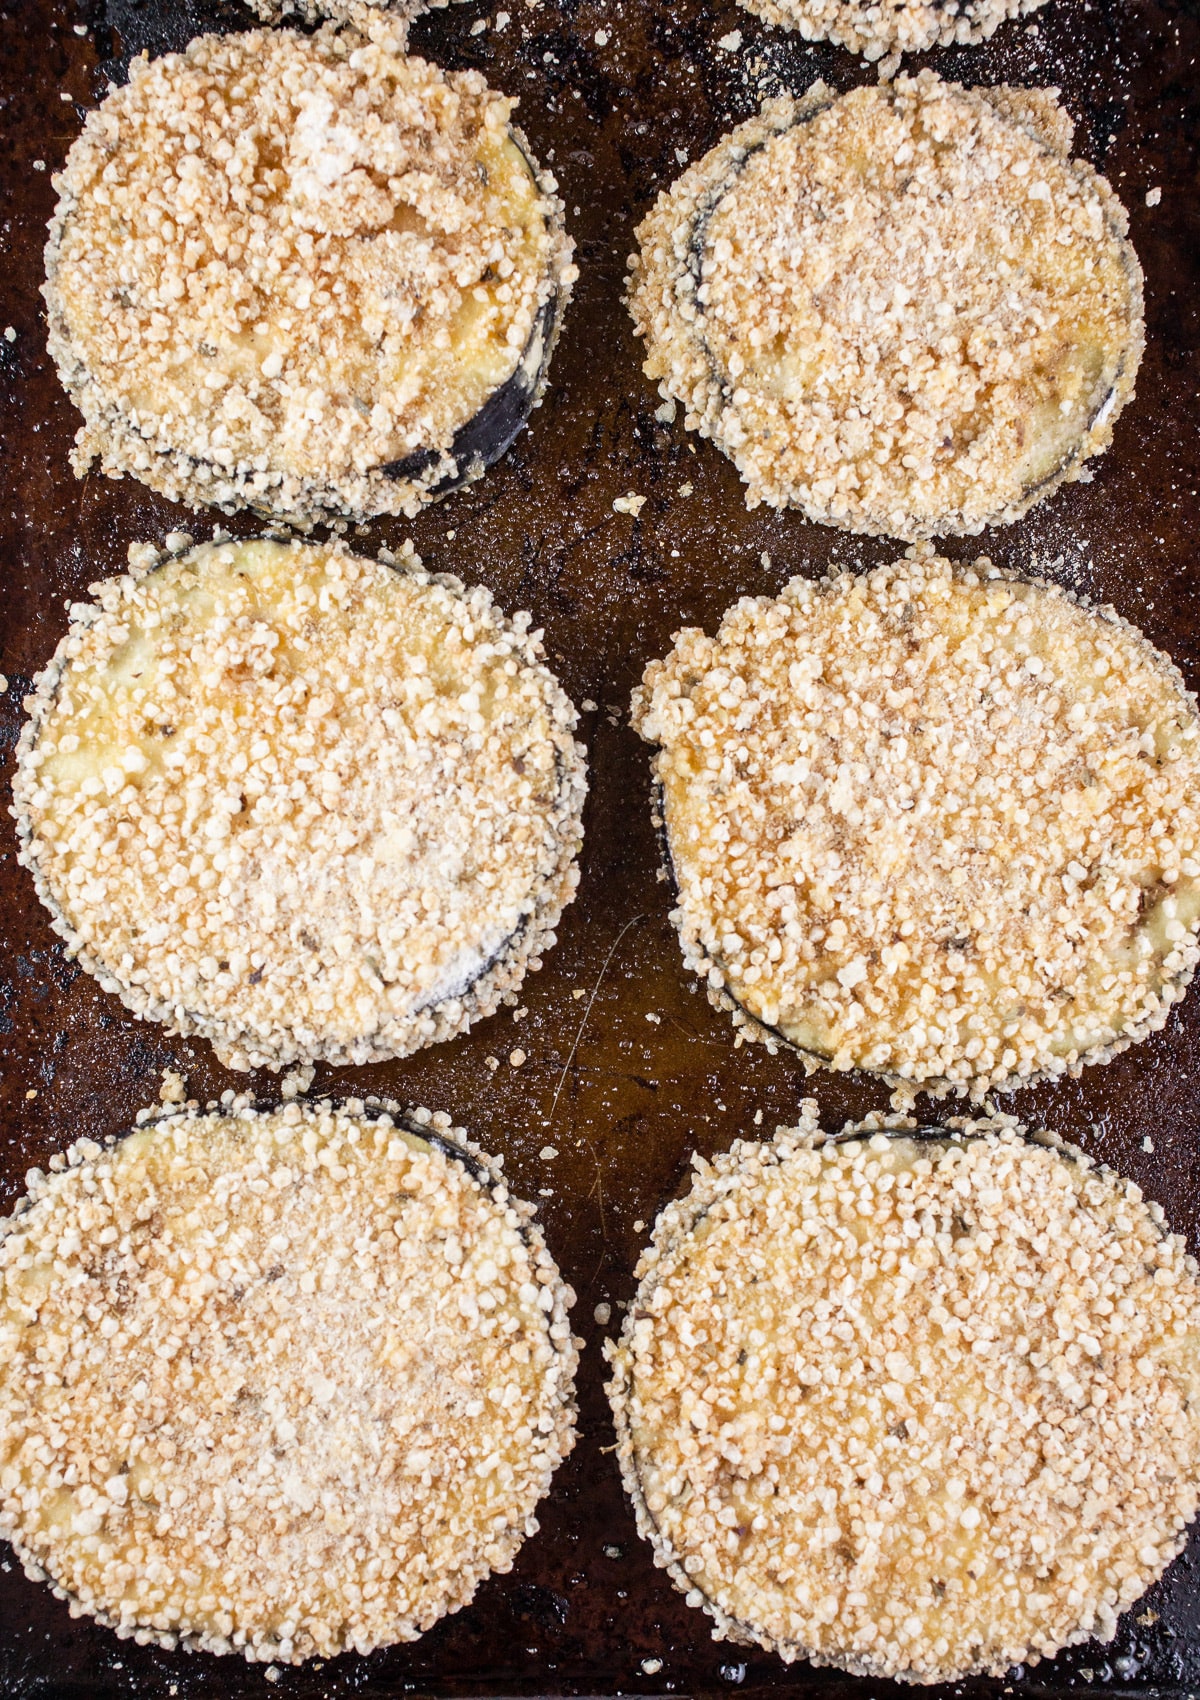 Uncooked breaded eggplant slices on baking sheet.